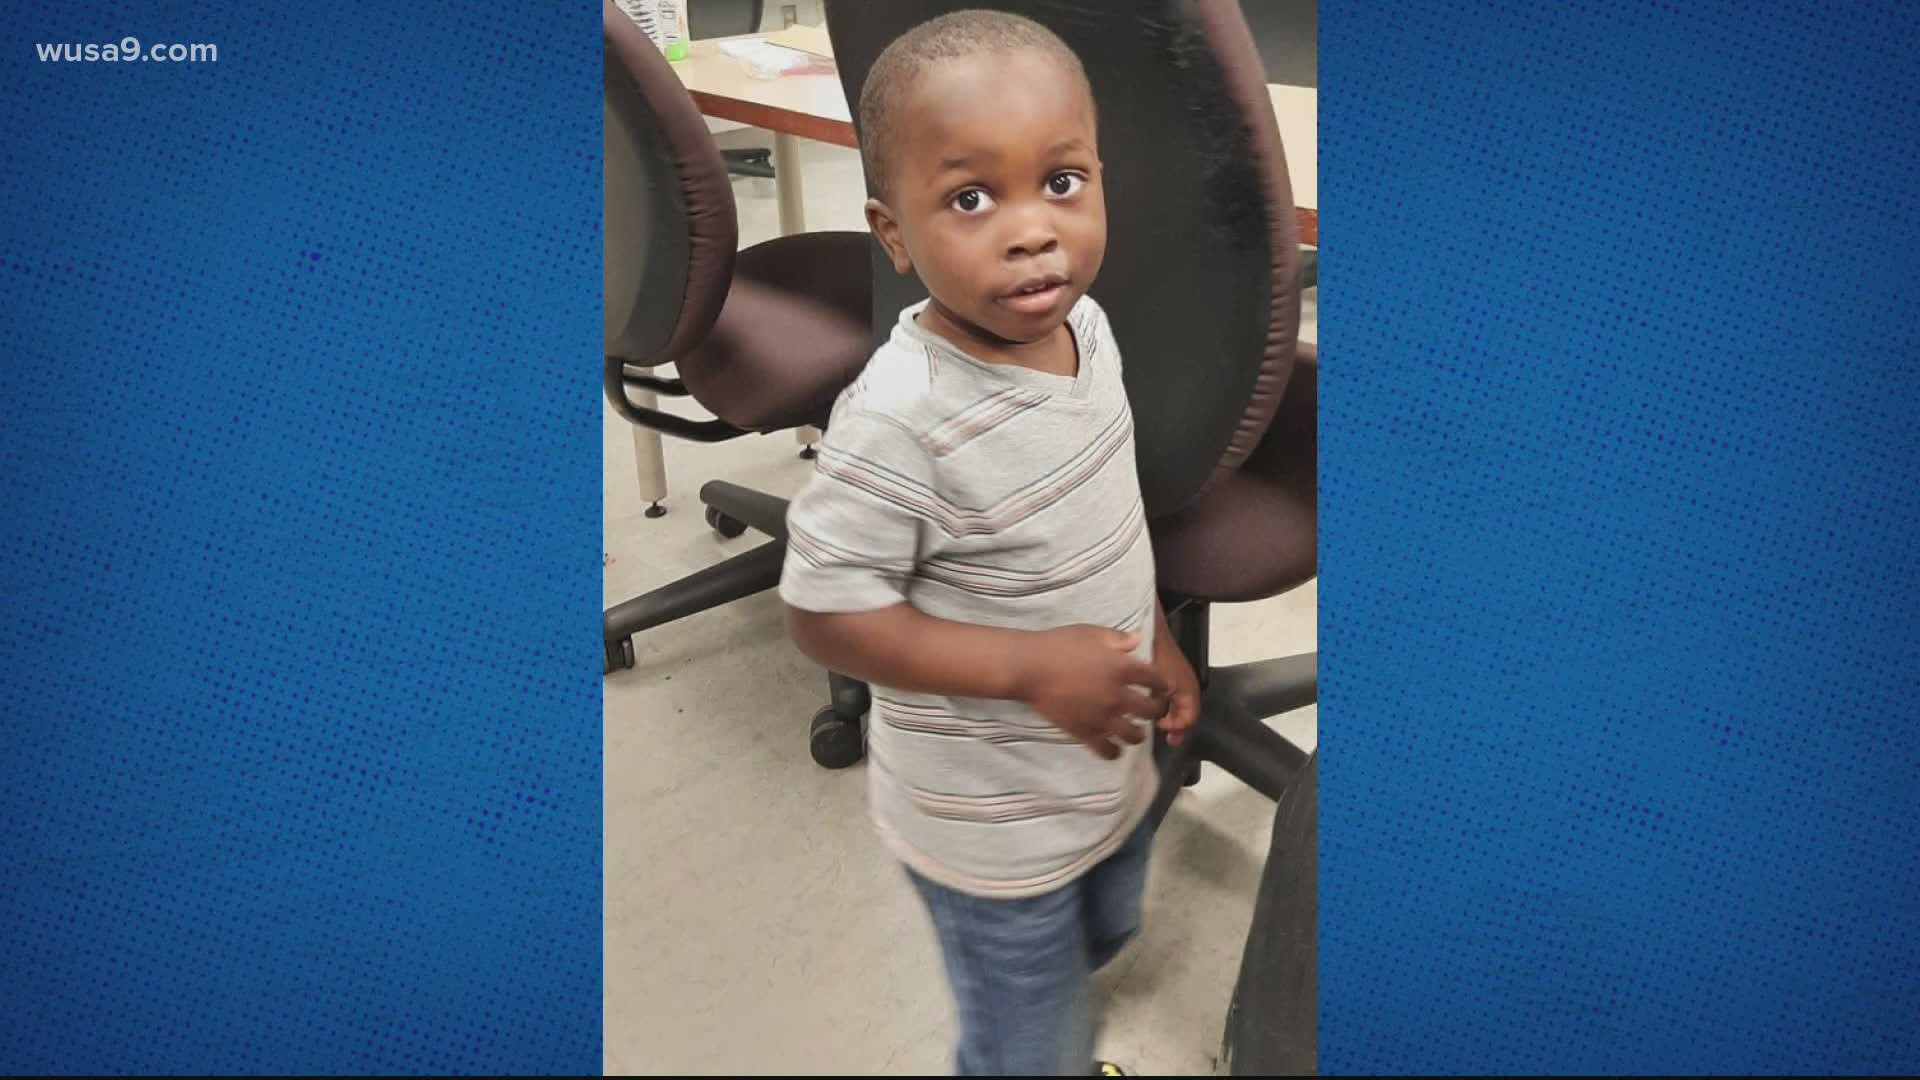 Police found a little boy in the White Oak area Thursday night and are searching for his parents or guardians.